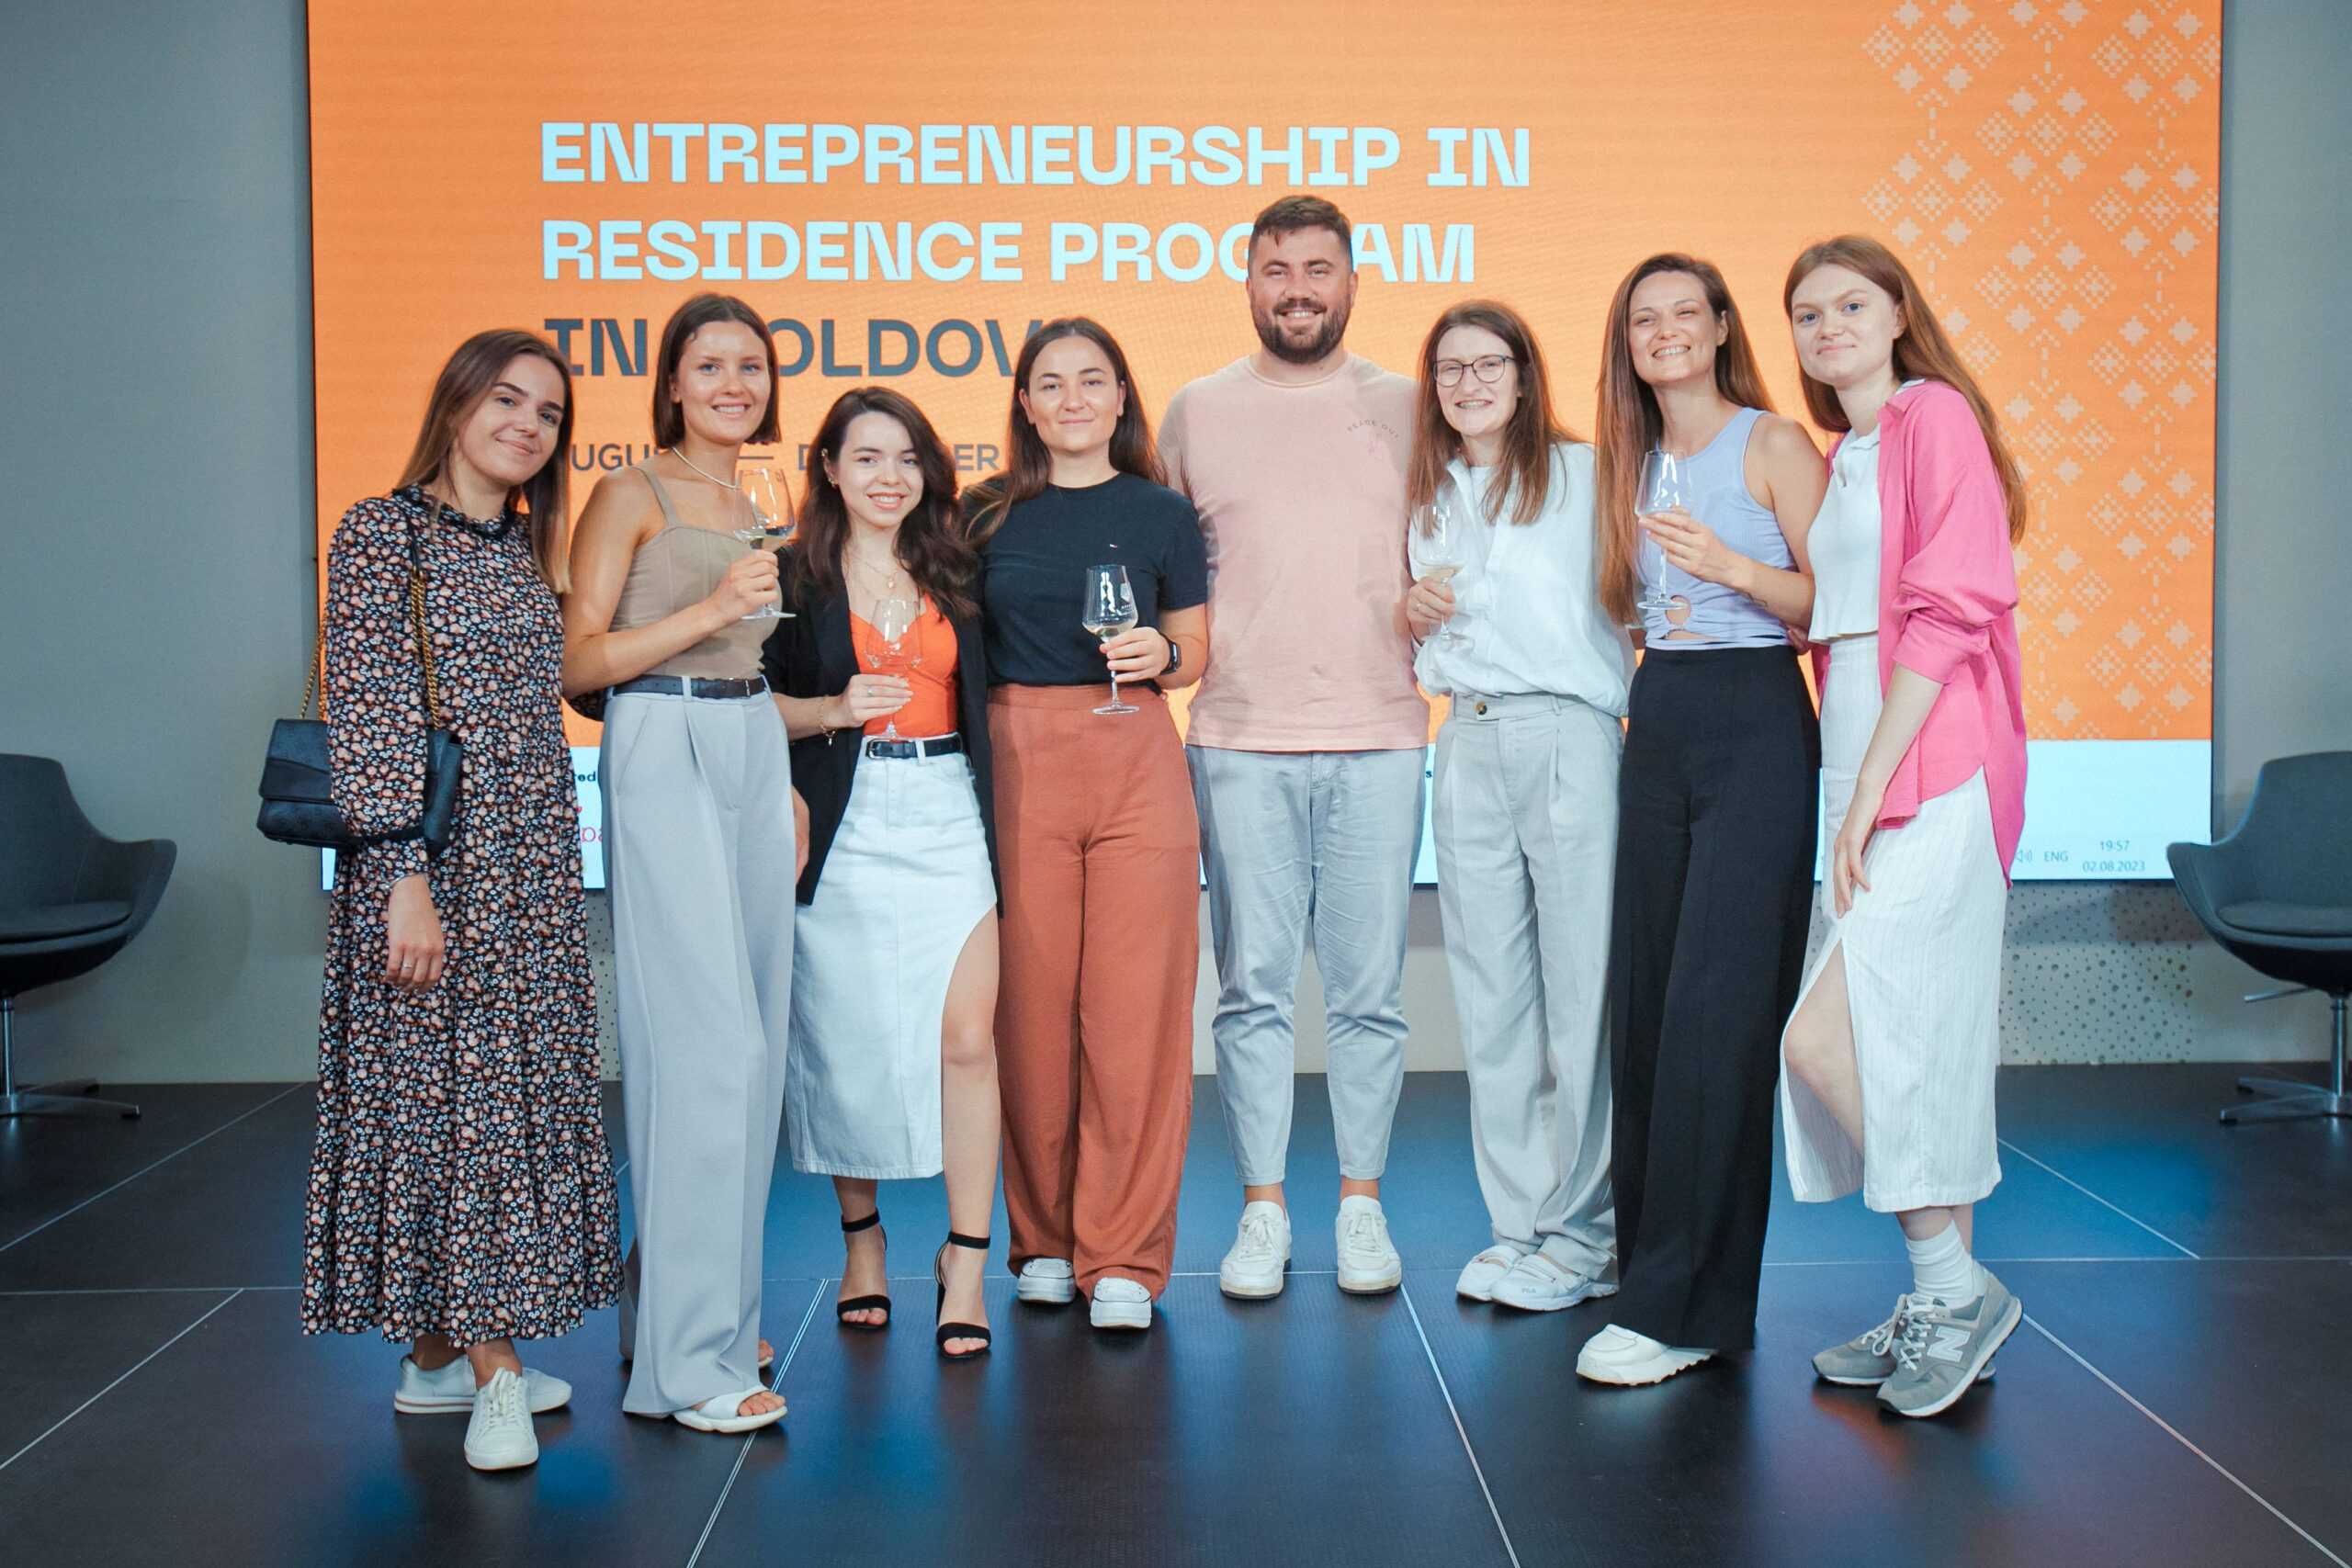 Free Mentorship Project for Startups Launched – Entrepreneurship in Residence Program in Moldova image